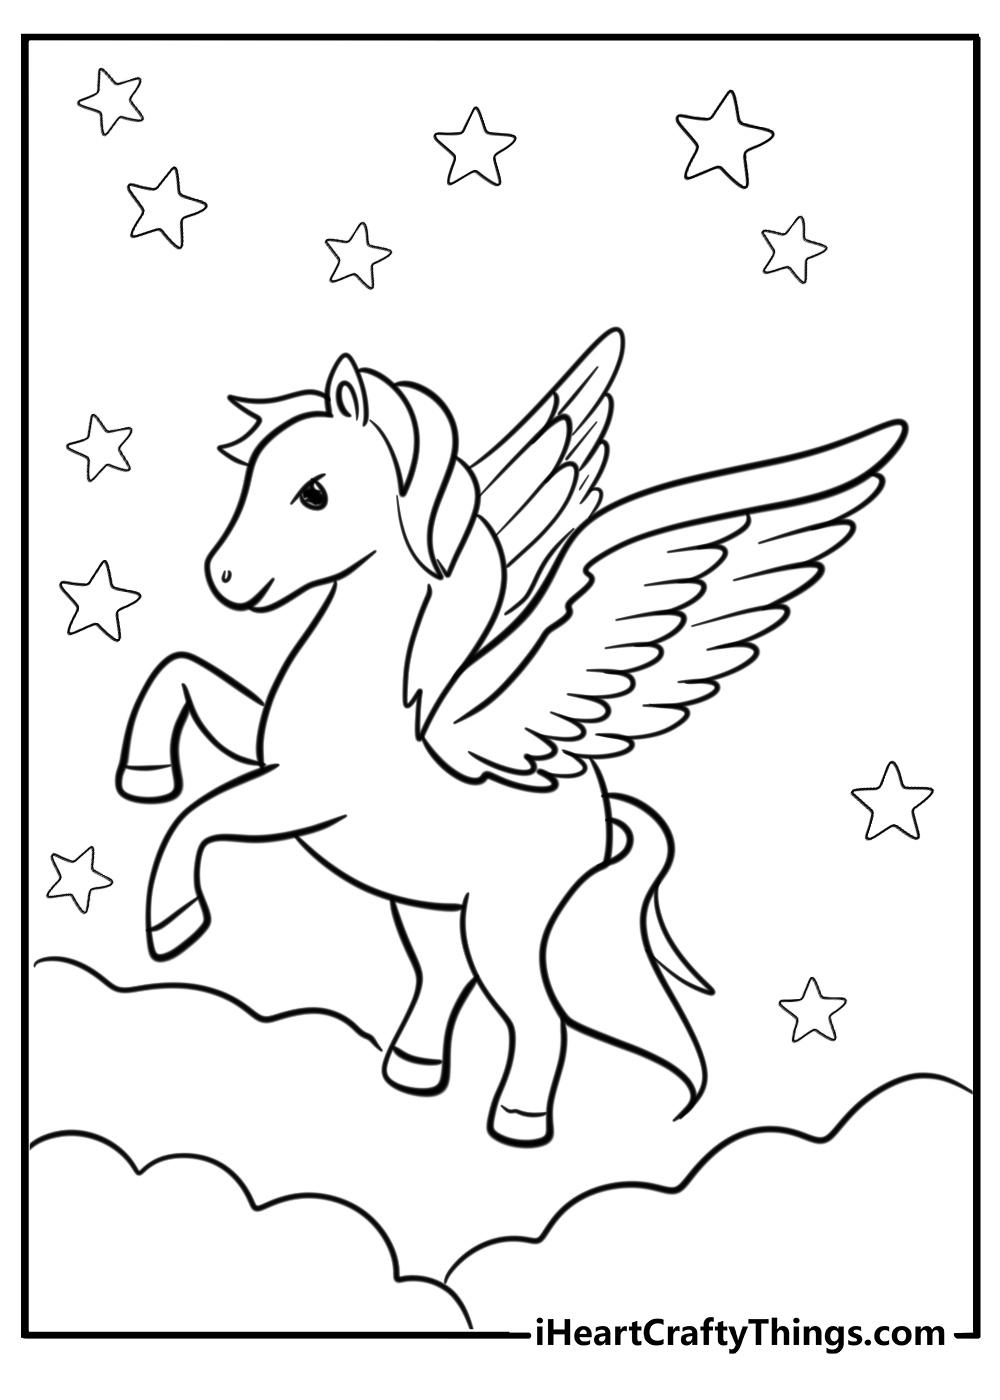 Simple cute pegasus coloring page for kids